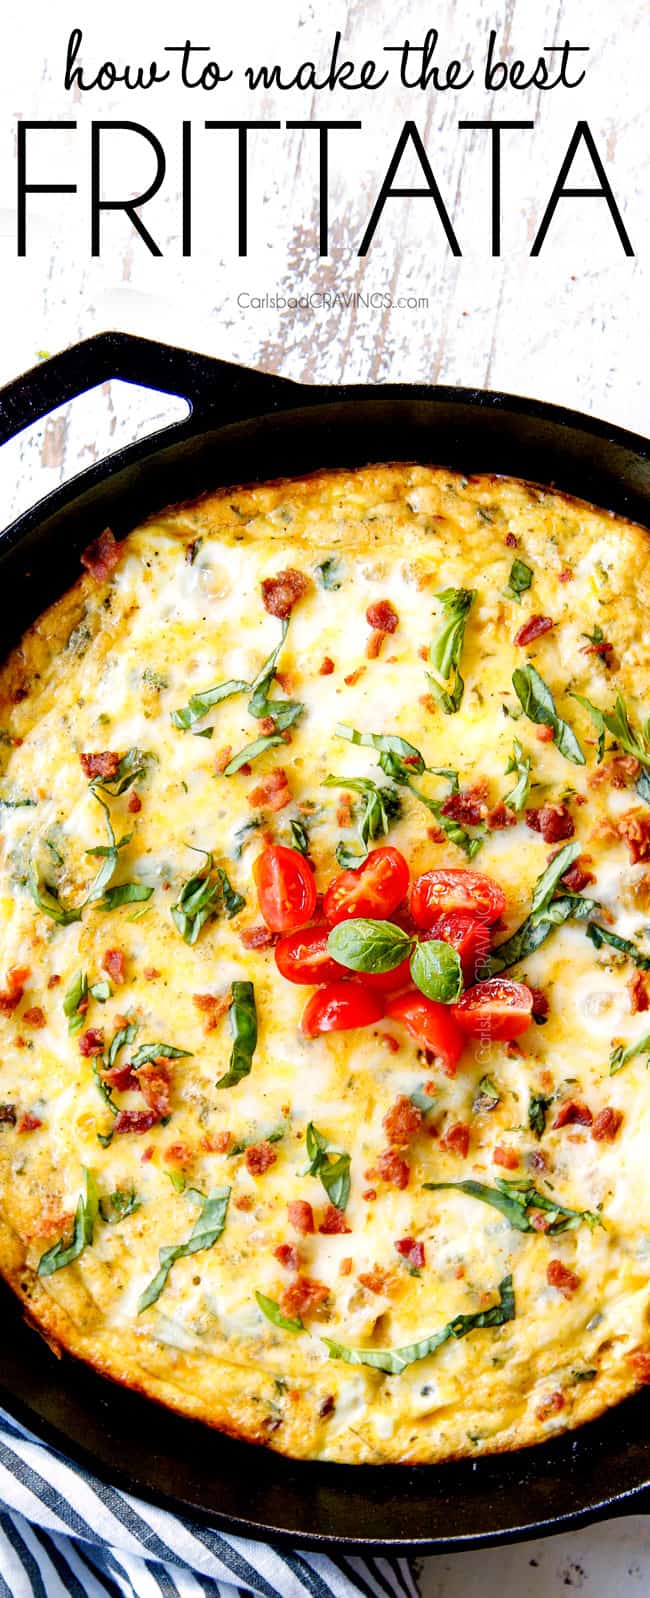 top view of egg frittata recipe in a cast iron skillet baked in the oven